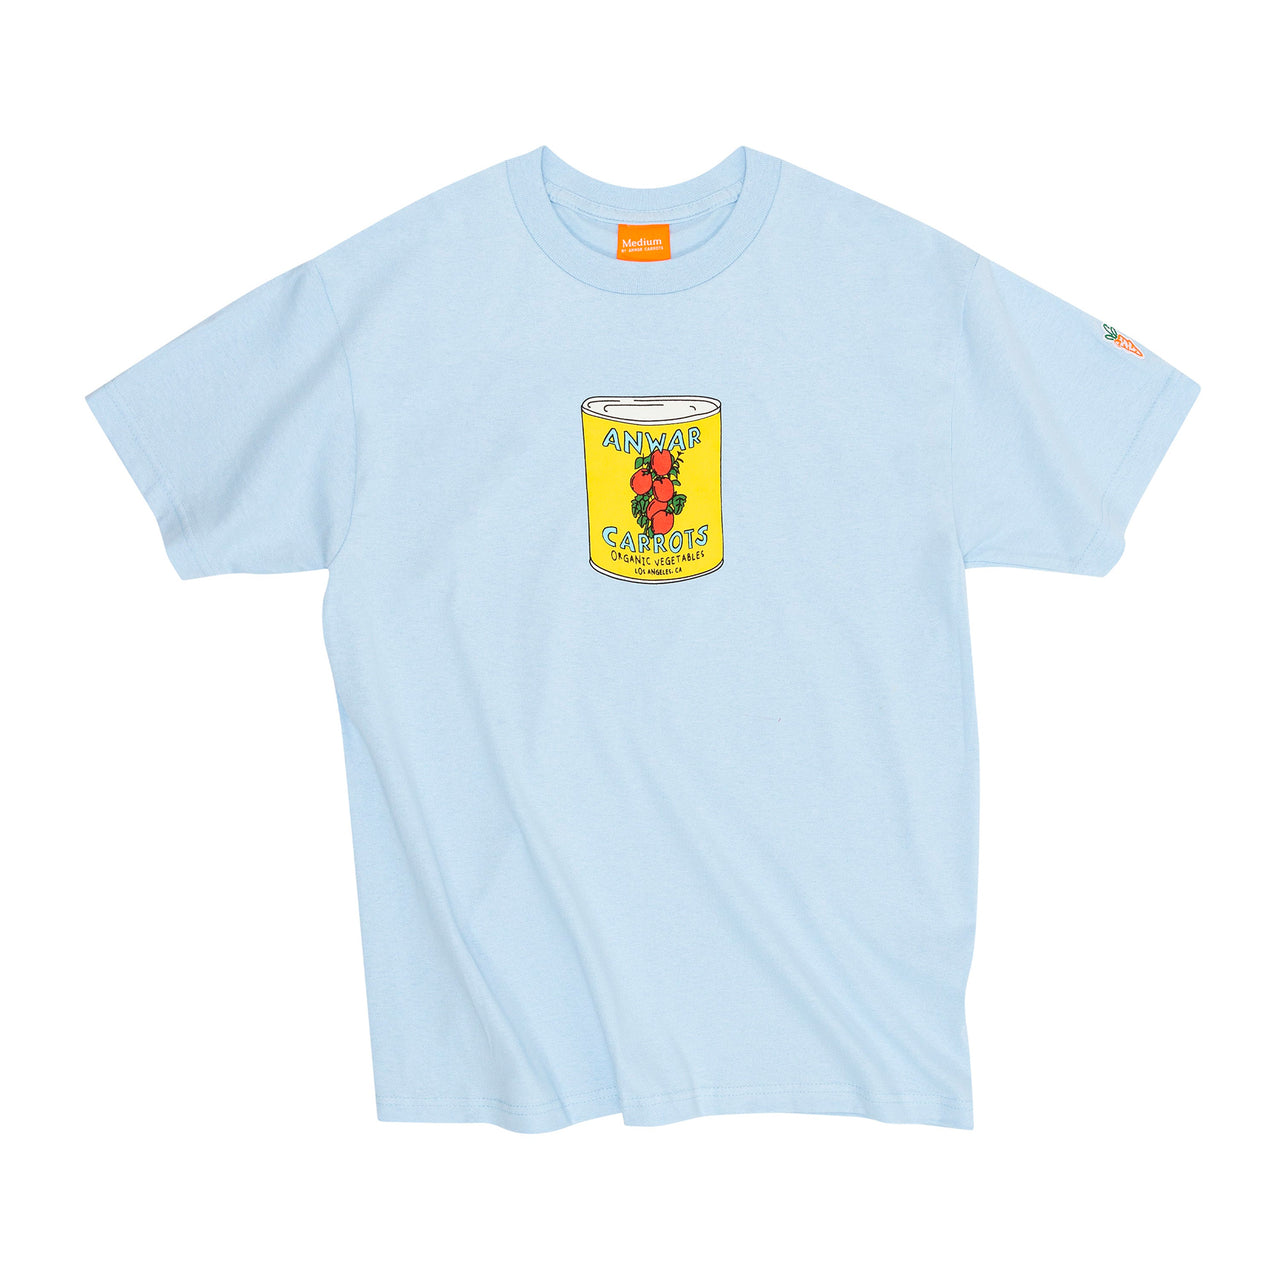 Canned T-Shirt - Baby Blue